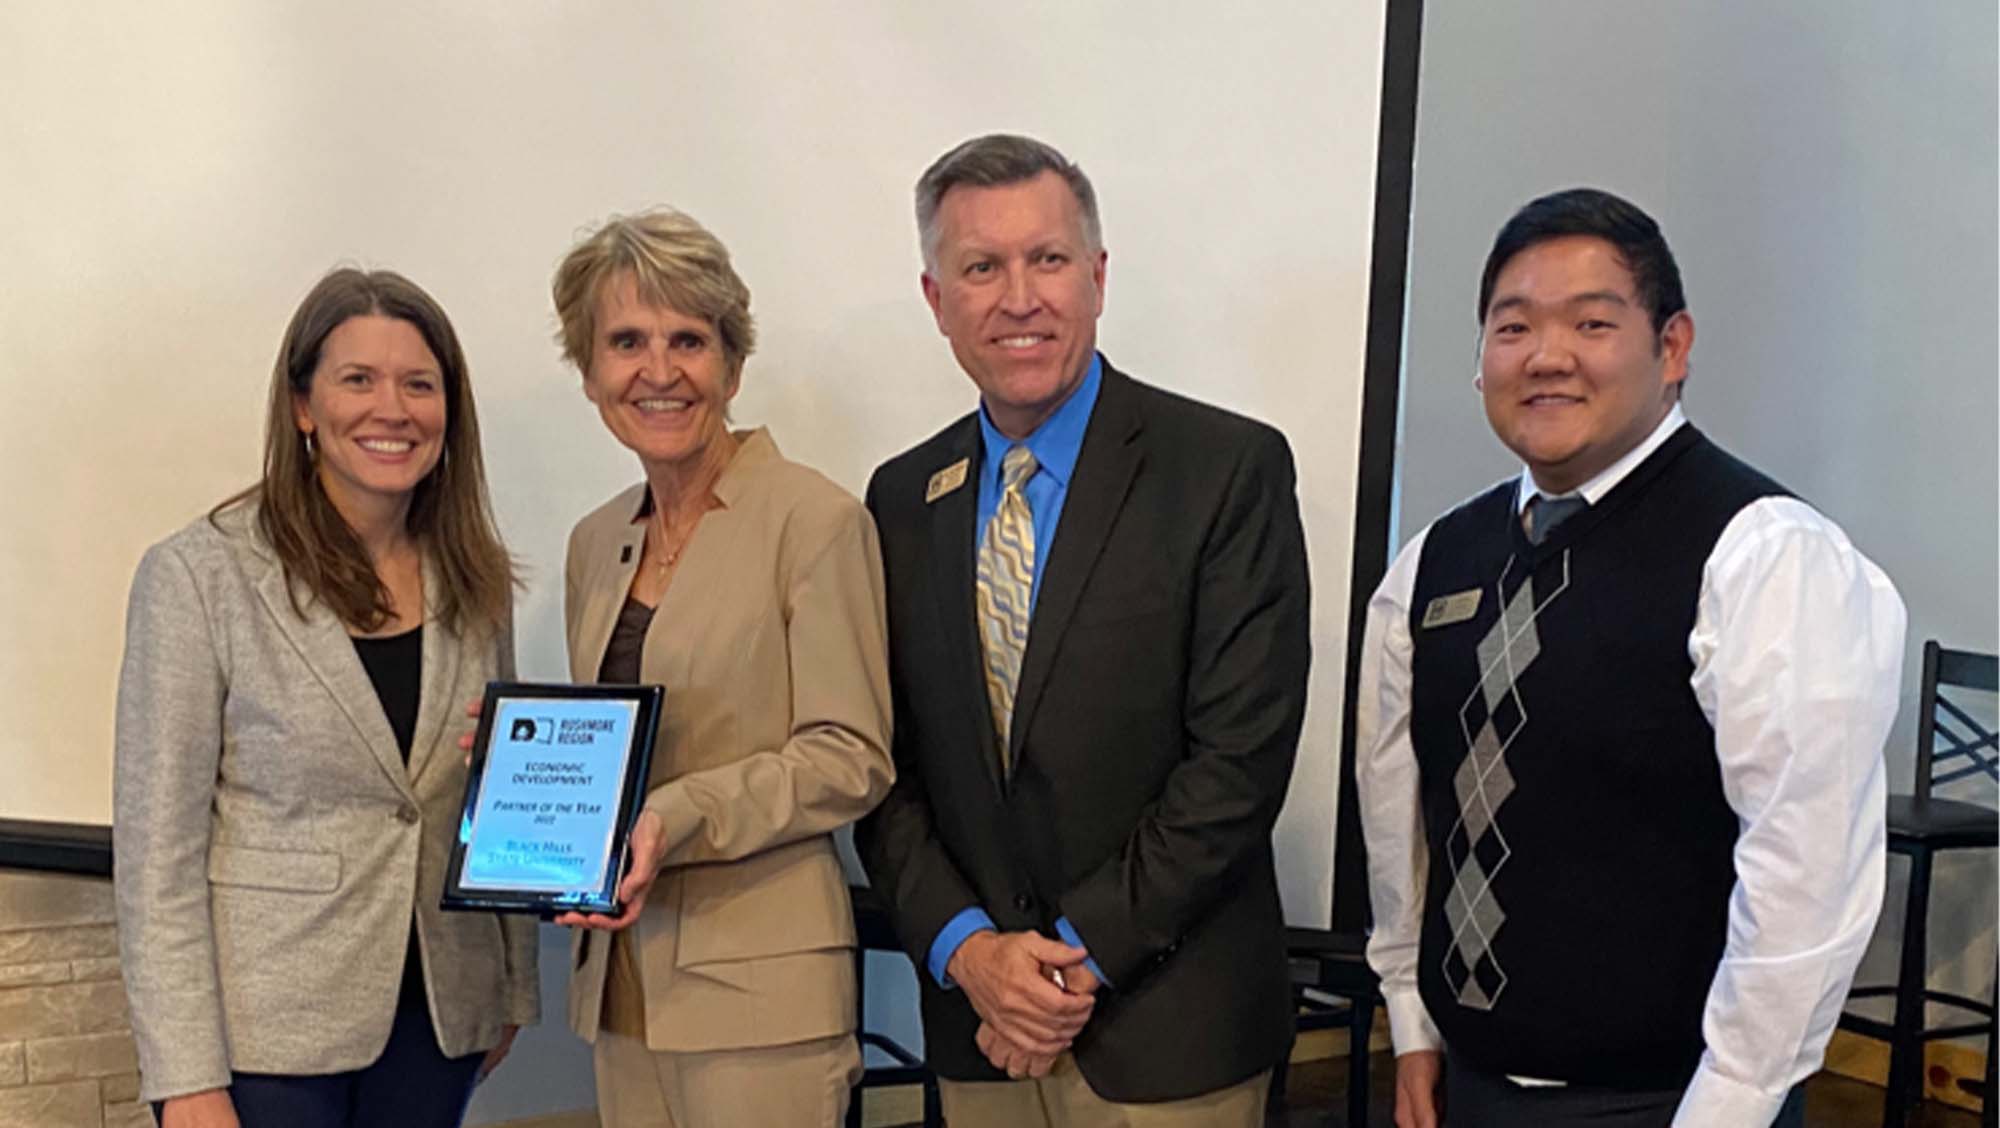 Fran White (left), executive director of BHCED, presents the Rushmore Region Partner of the Year award to BHSU President Laurie S. Nichols, r. Jon Kilpinen, provost and vice president for Academic Affairs, and Jin Kim, director of Career Development at the annual Small Business RoundUP event hosted by Black Hills Community Economic Development. 